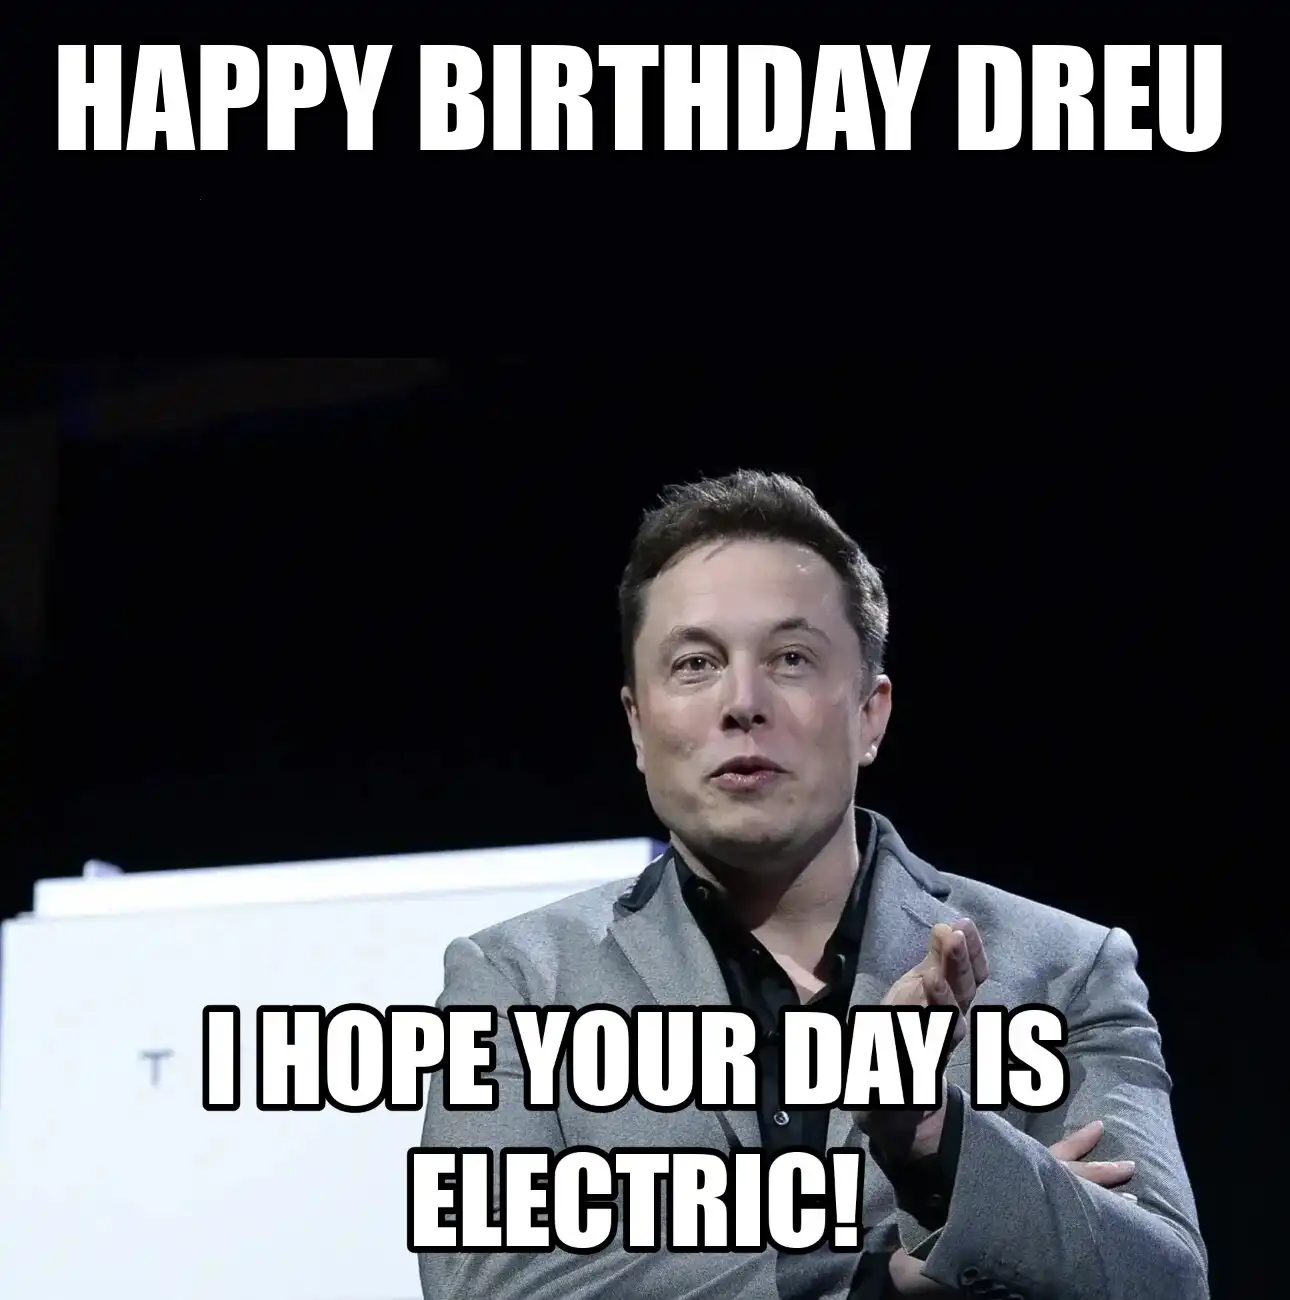 Happy Birthday Dreu I Hope Your Day Is Electric Meme